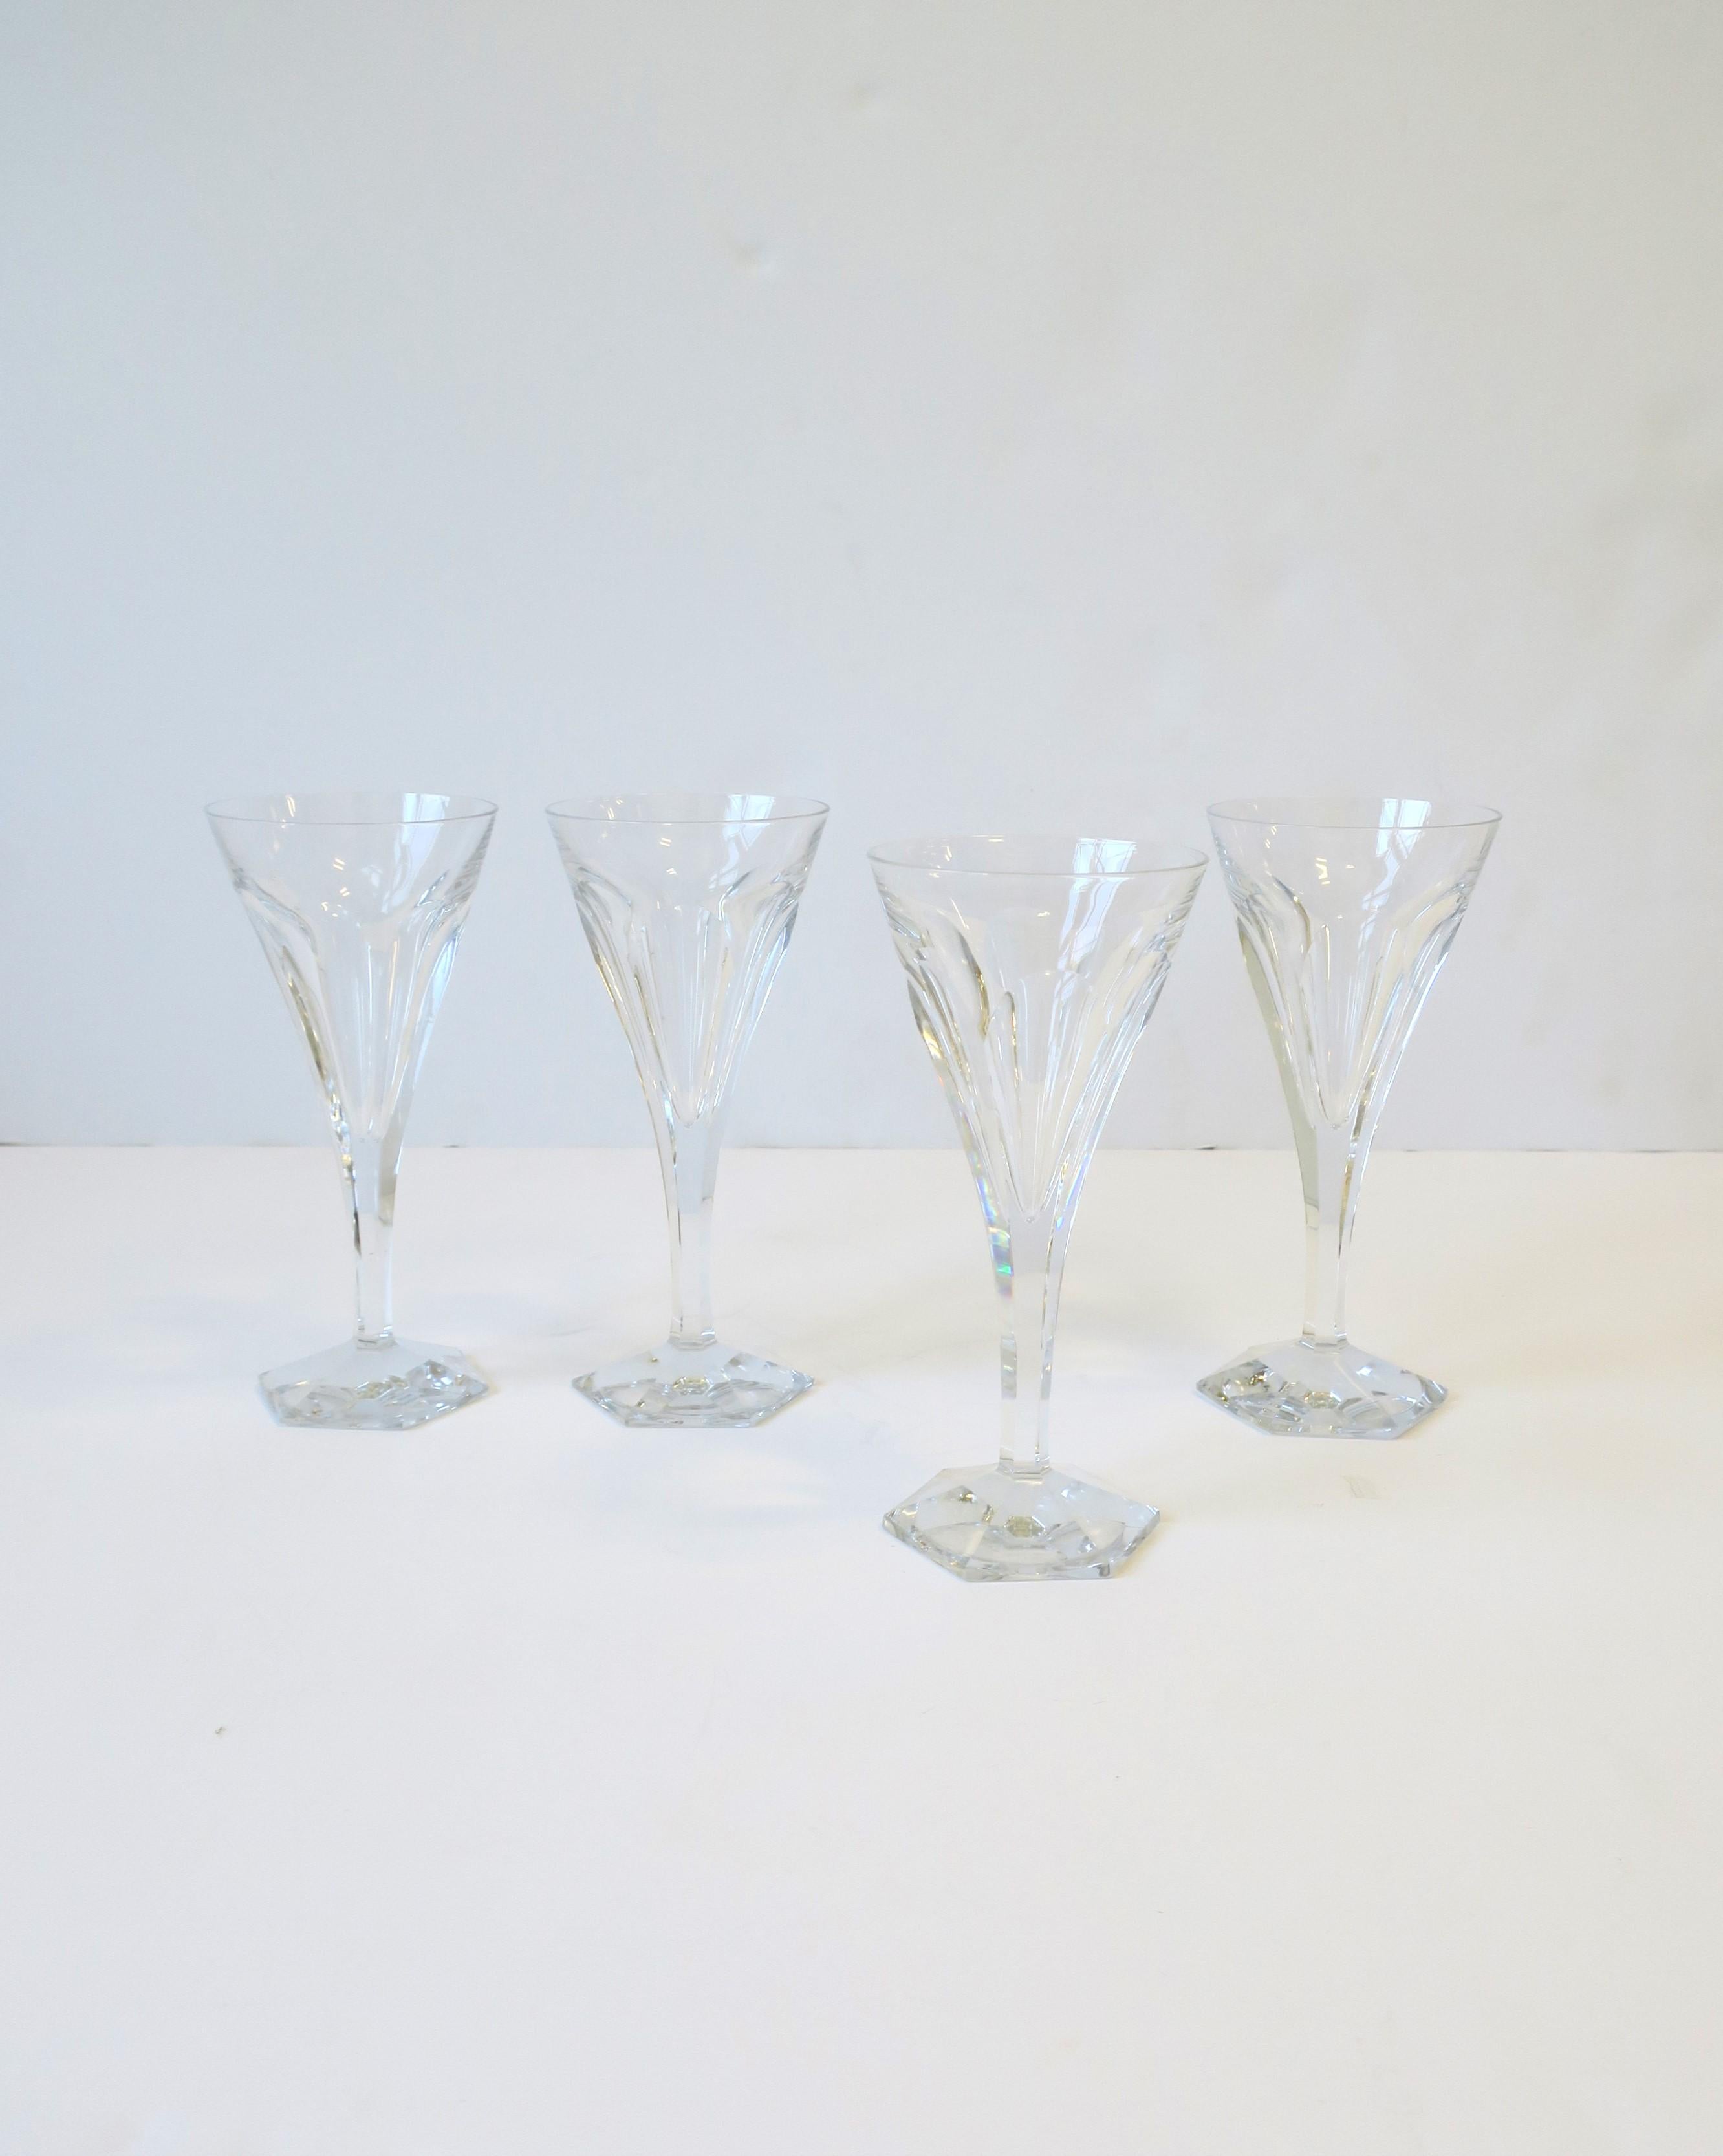 A beautiful and substantial set of four (4) Belgian crystal wine or cocktail glasses from luxury crystal Maison, Val Saint Lambert, circa late-20th century, Belgium. A great set for any bar, bar cart, china cabinet, etc. Beautiful to serve a